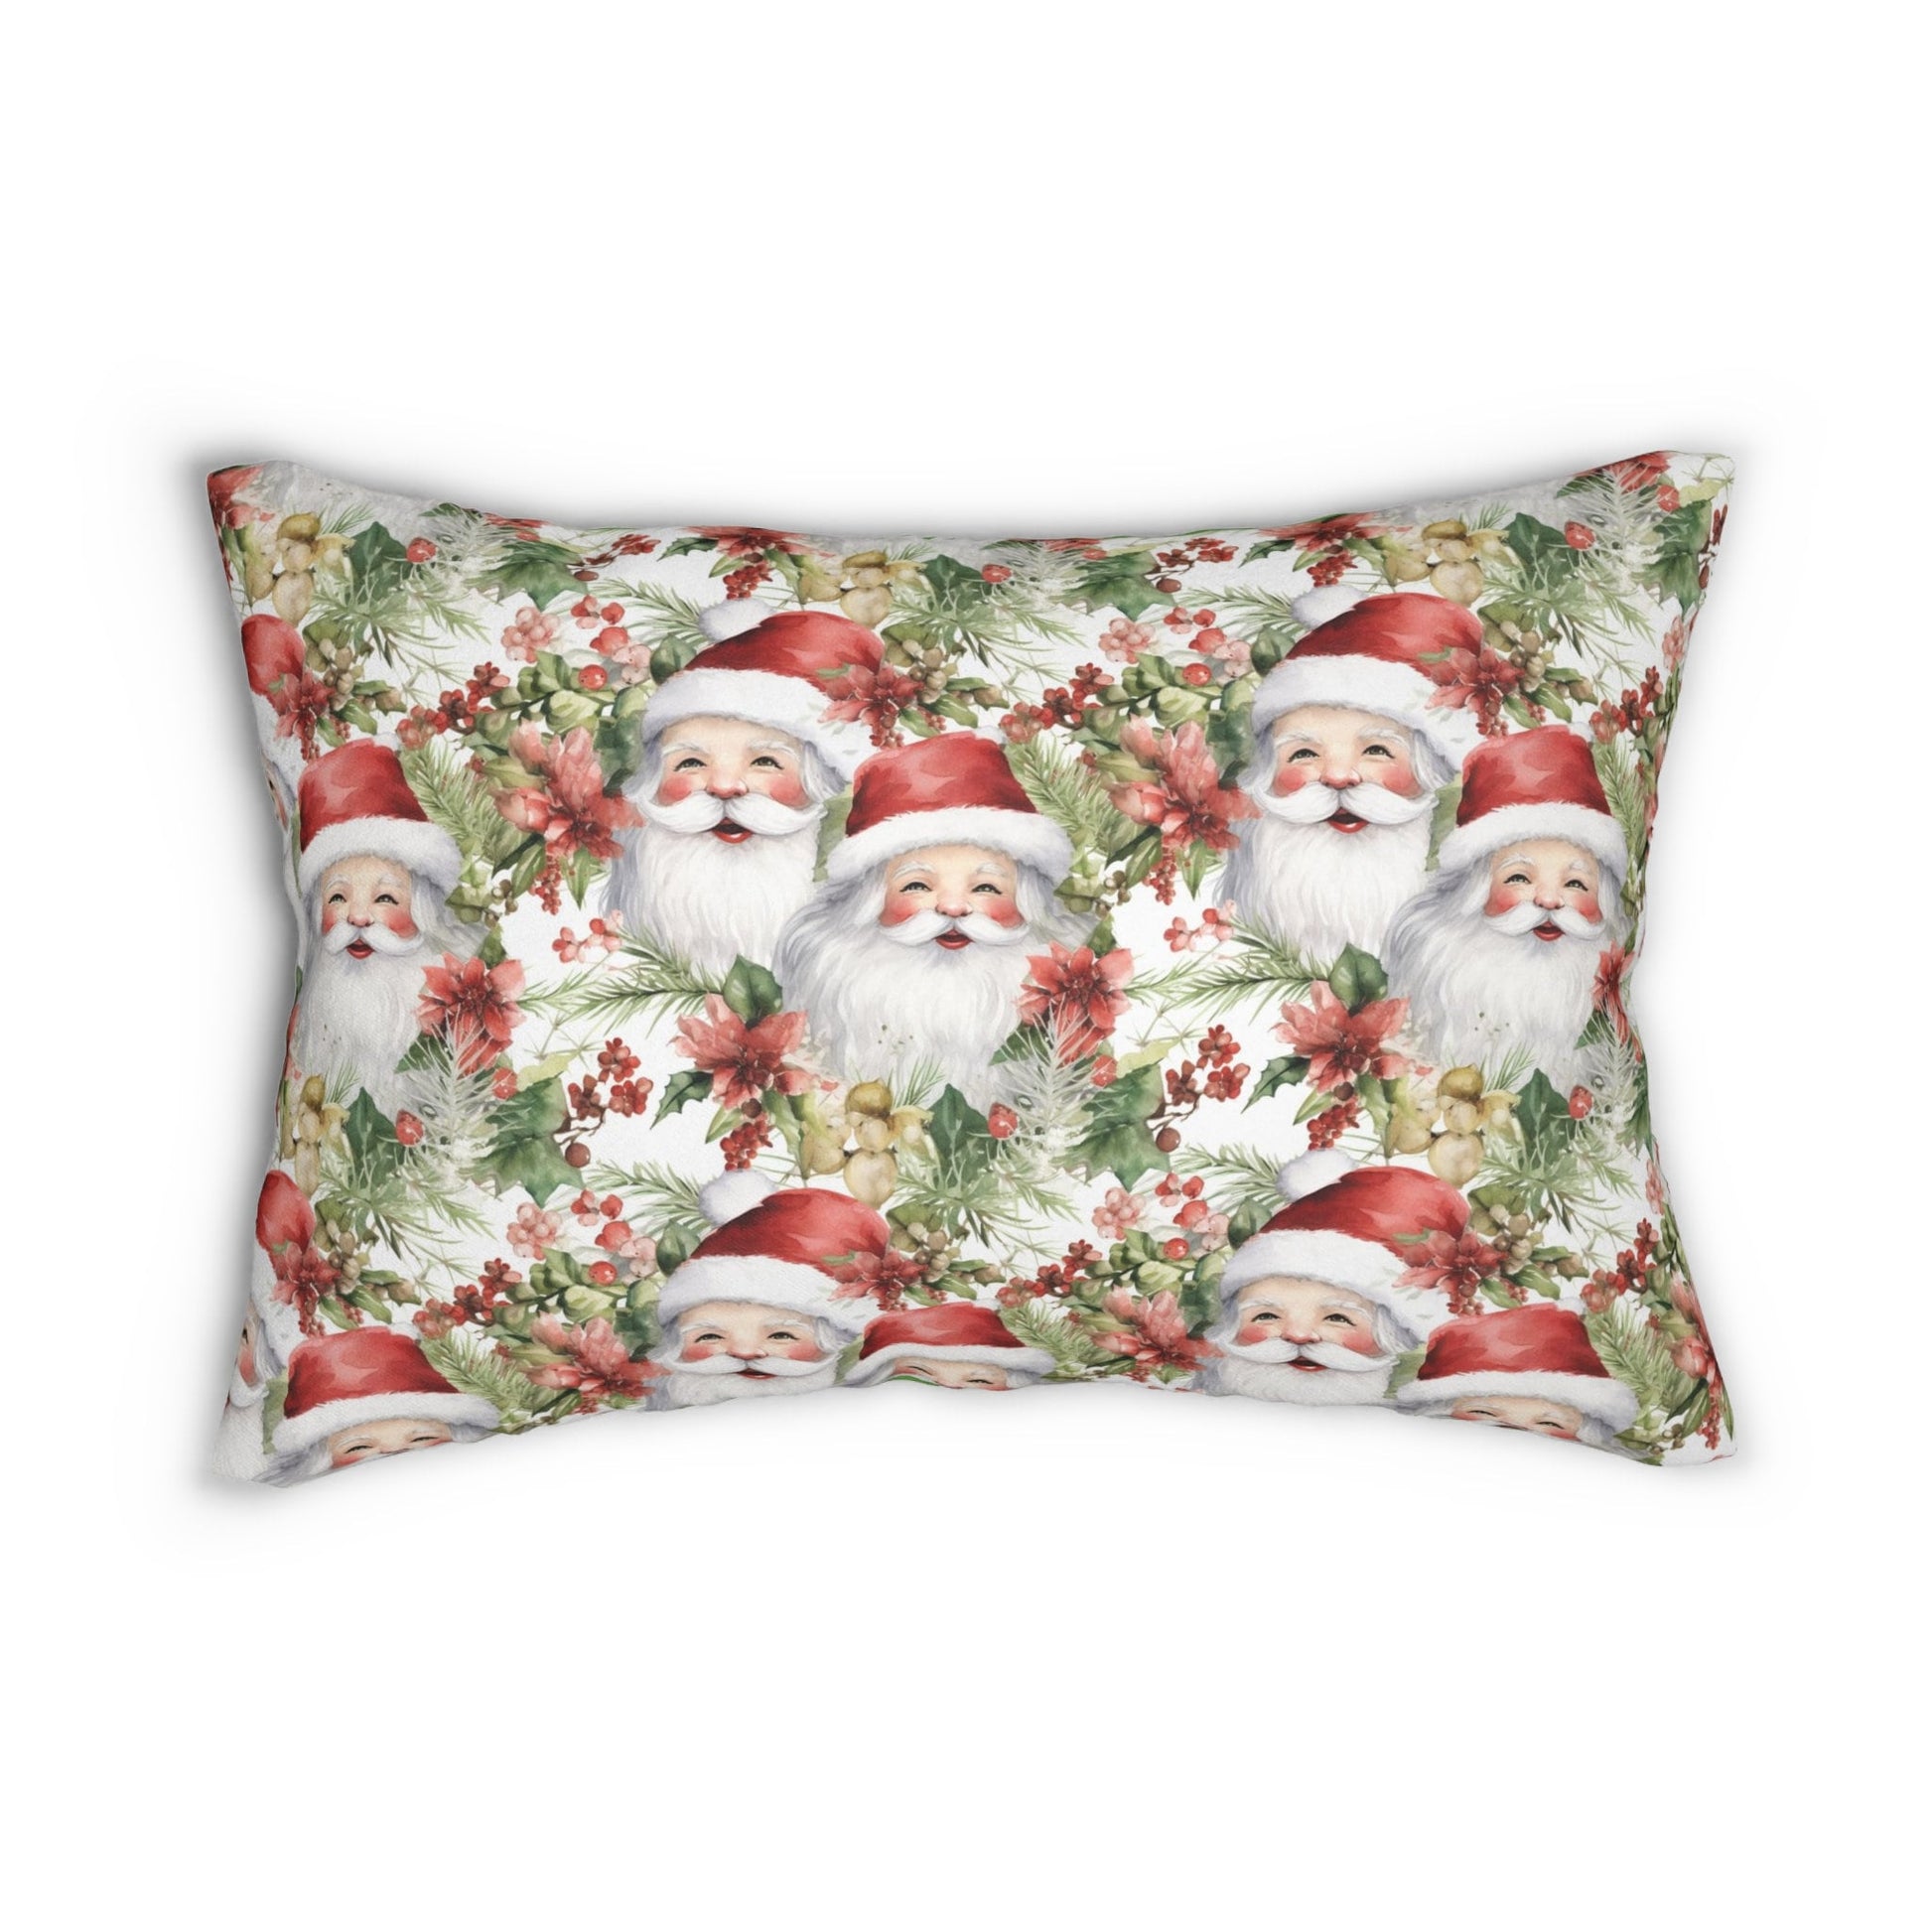 a christmas pillow with santa claus on it